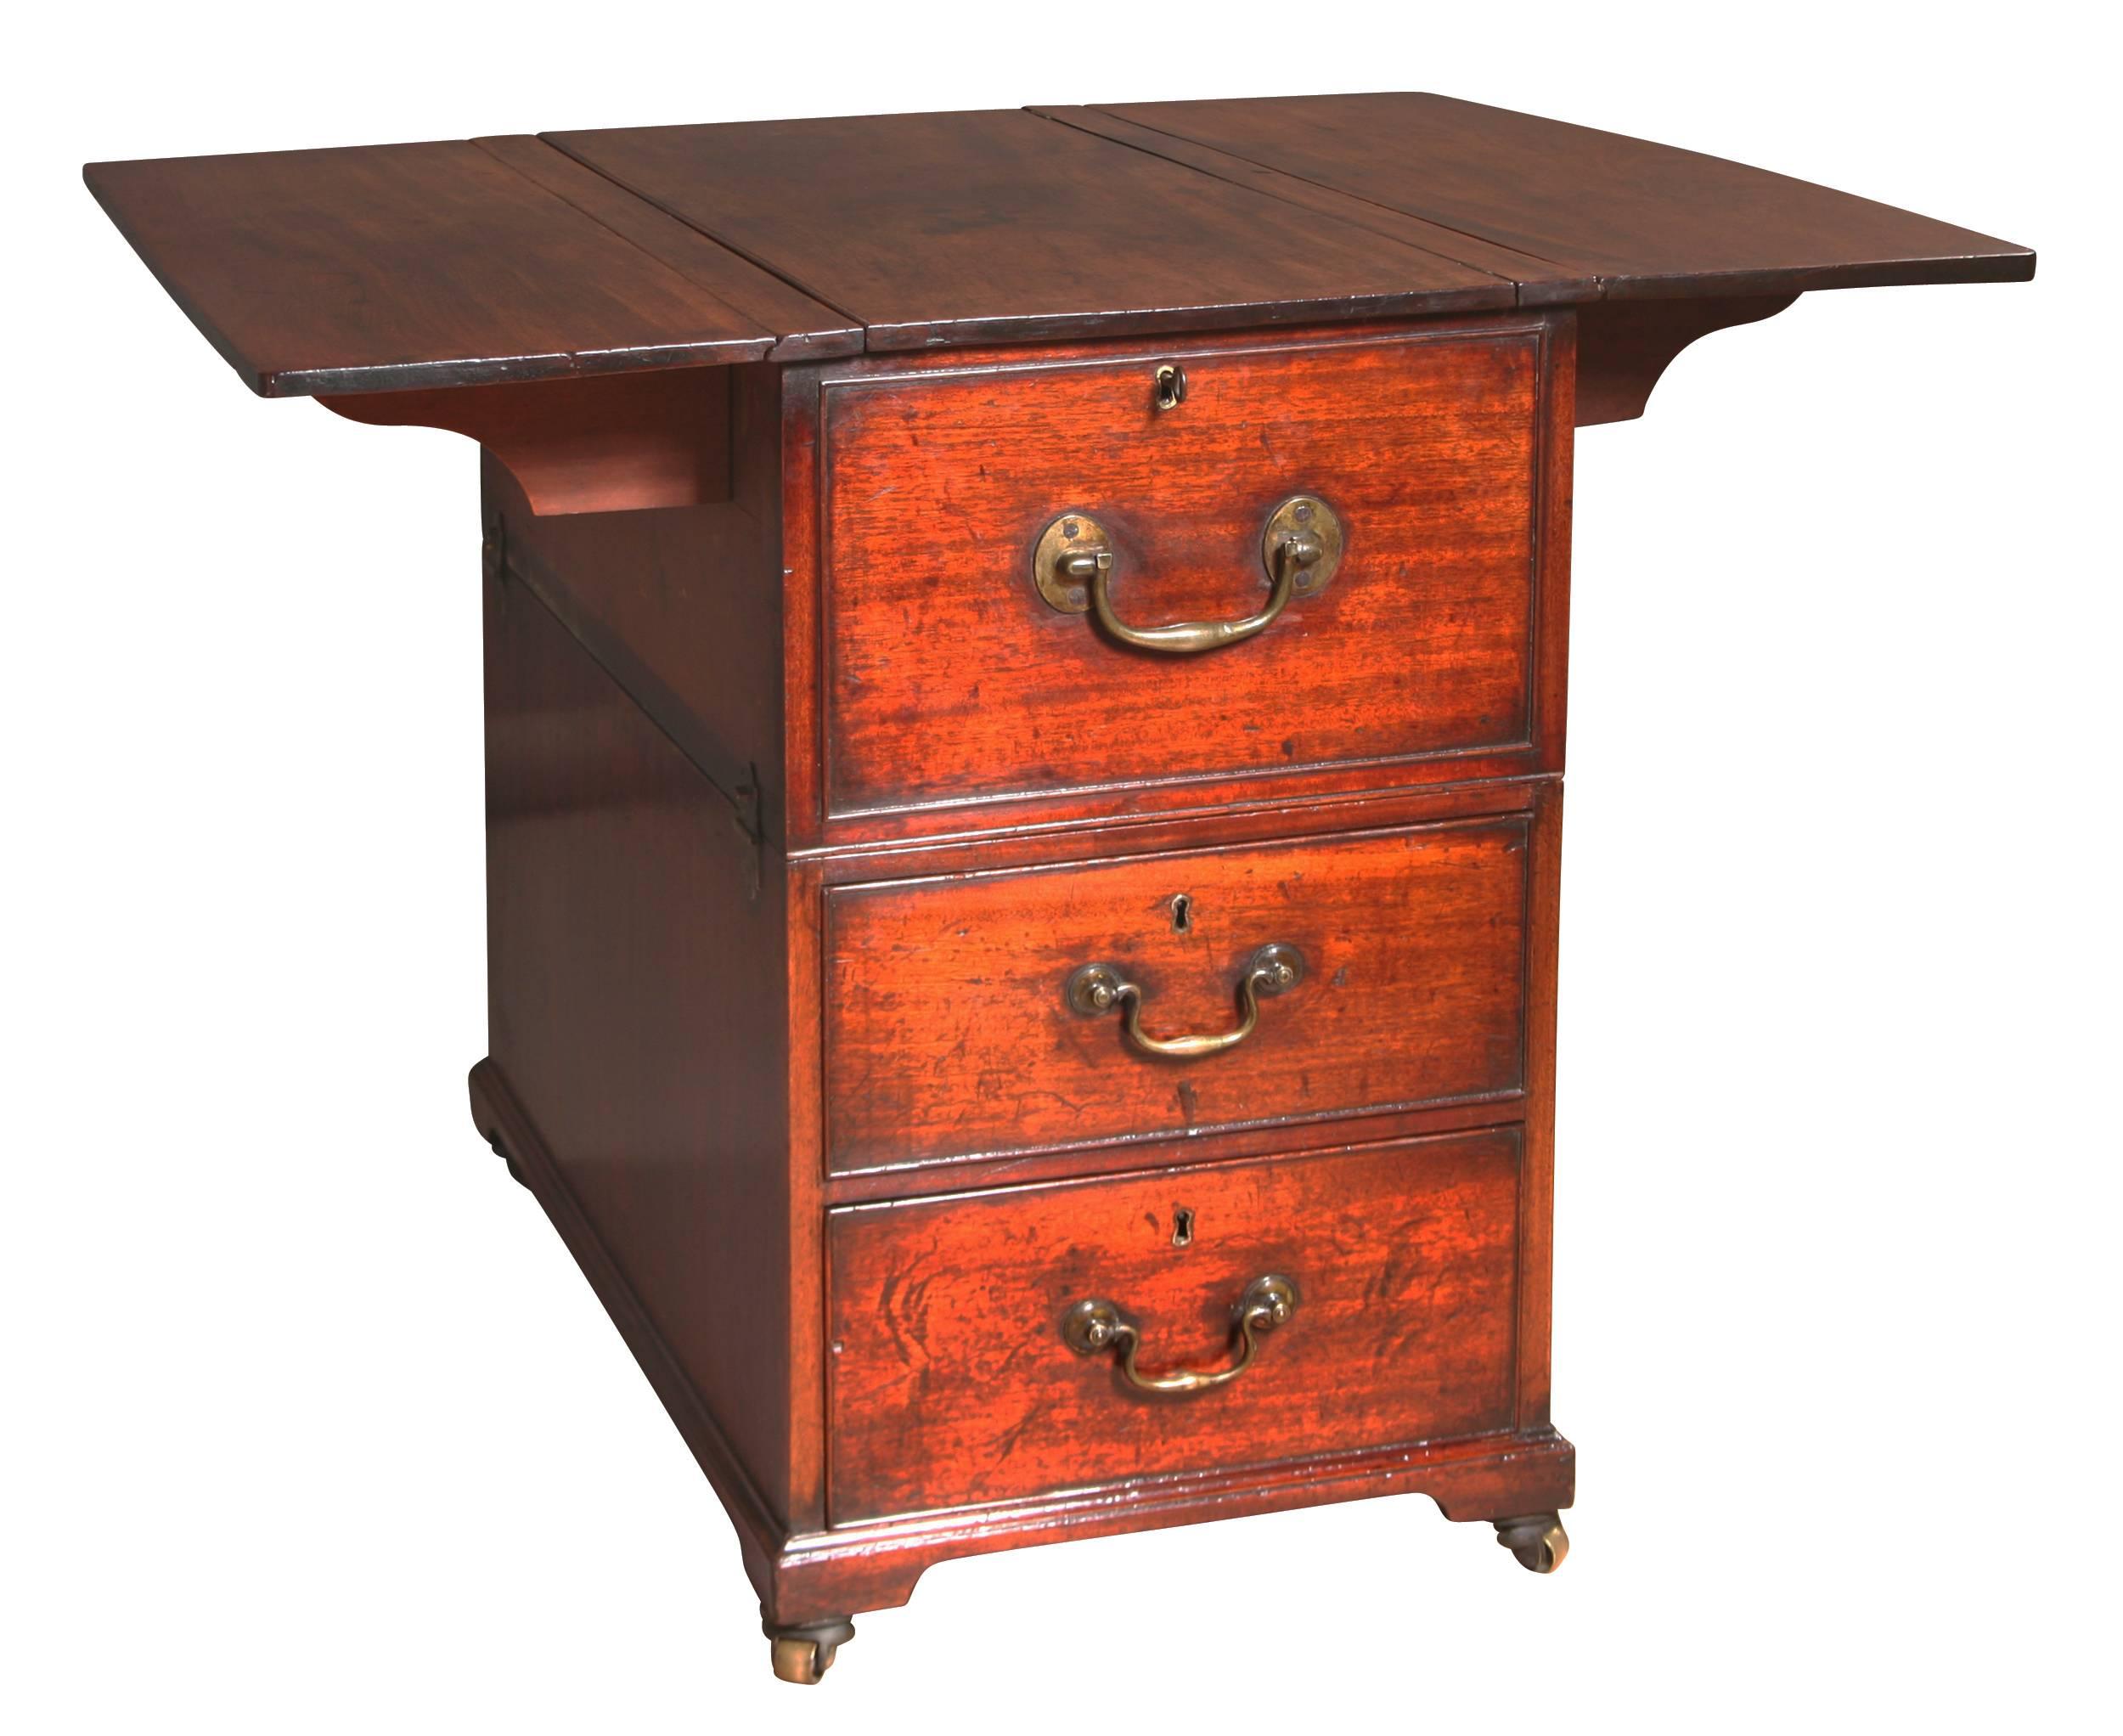 This Georgian, mahogany Cabin or Map Table is unlike any other we have seen before. Like a campaign chest it is made in two parts with the top section fixing to the bottom by two brass twist locks to either side. Typically, Cabin Tables have a